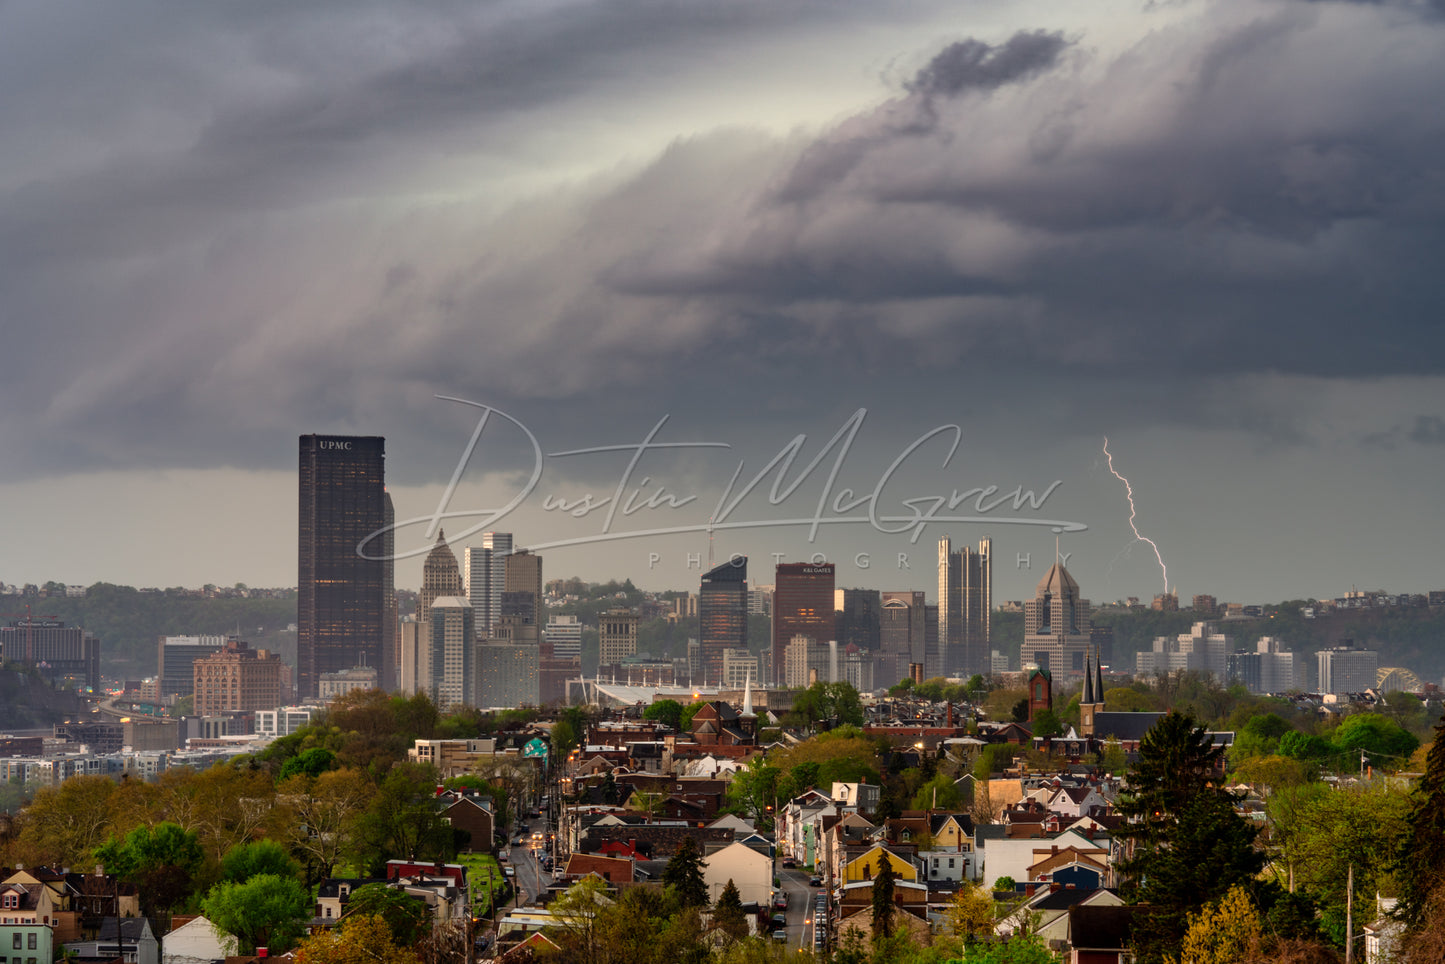 Thunderstorms and Pittsburgh Skyline Viewed from Troy Hill